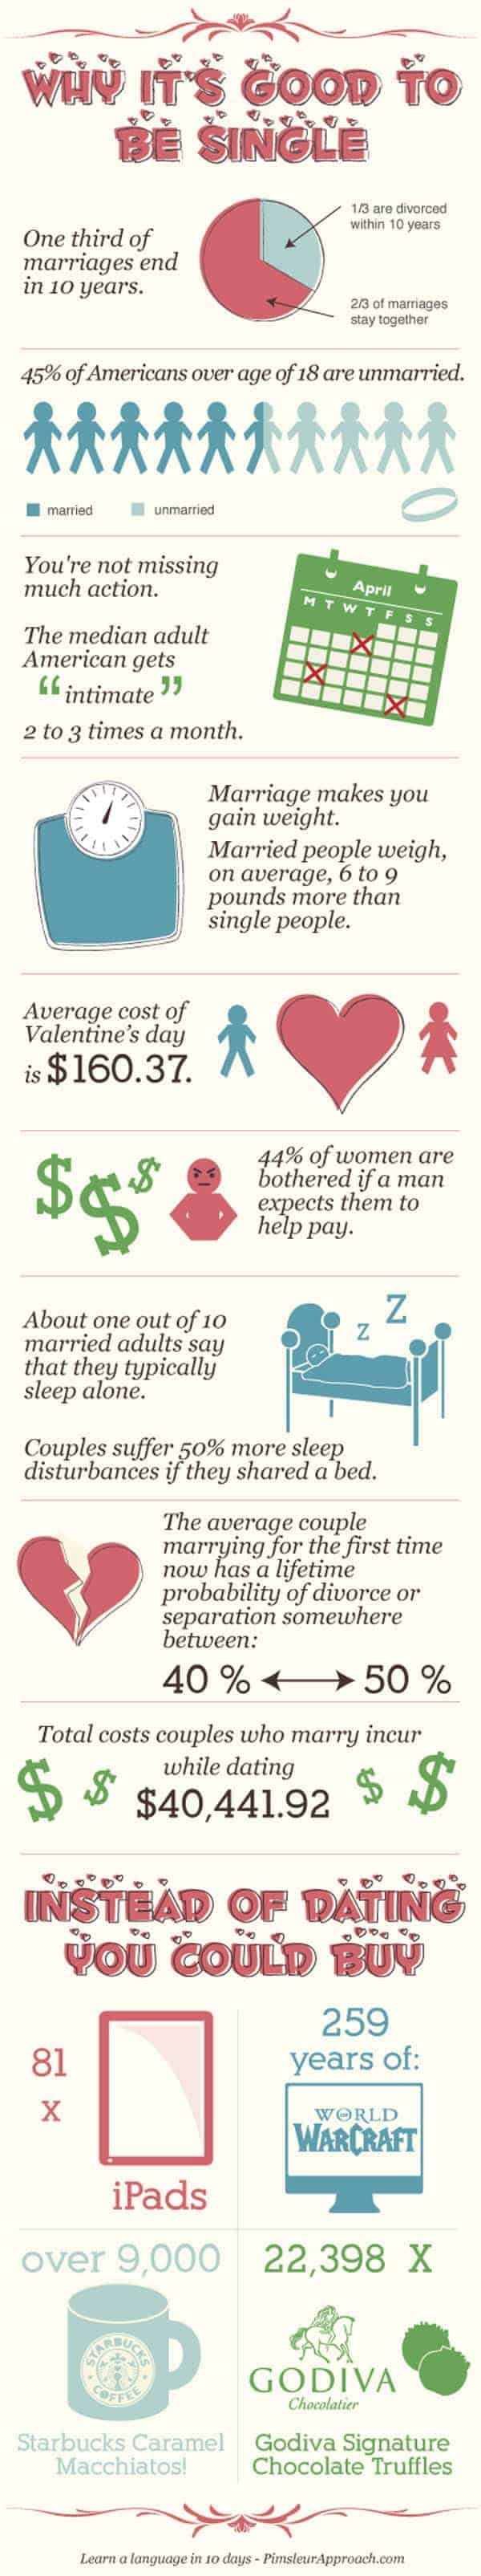 Why It's Good to be Single? (Infographic)